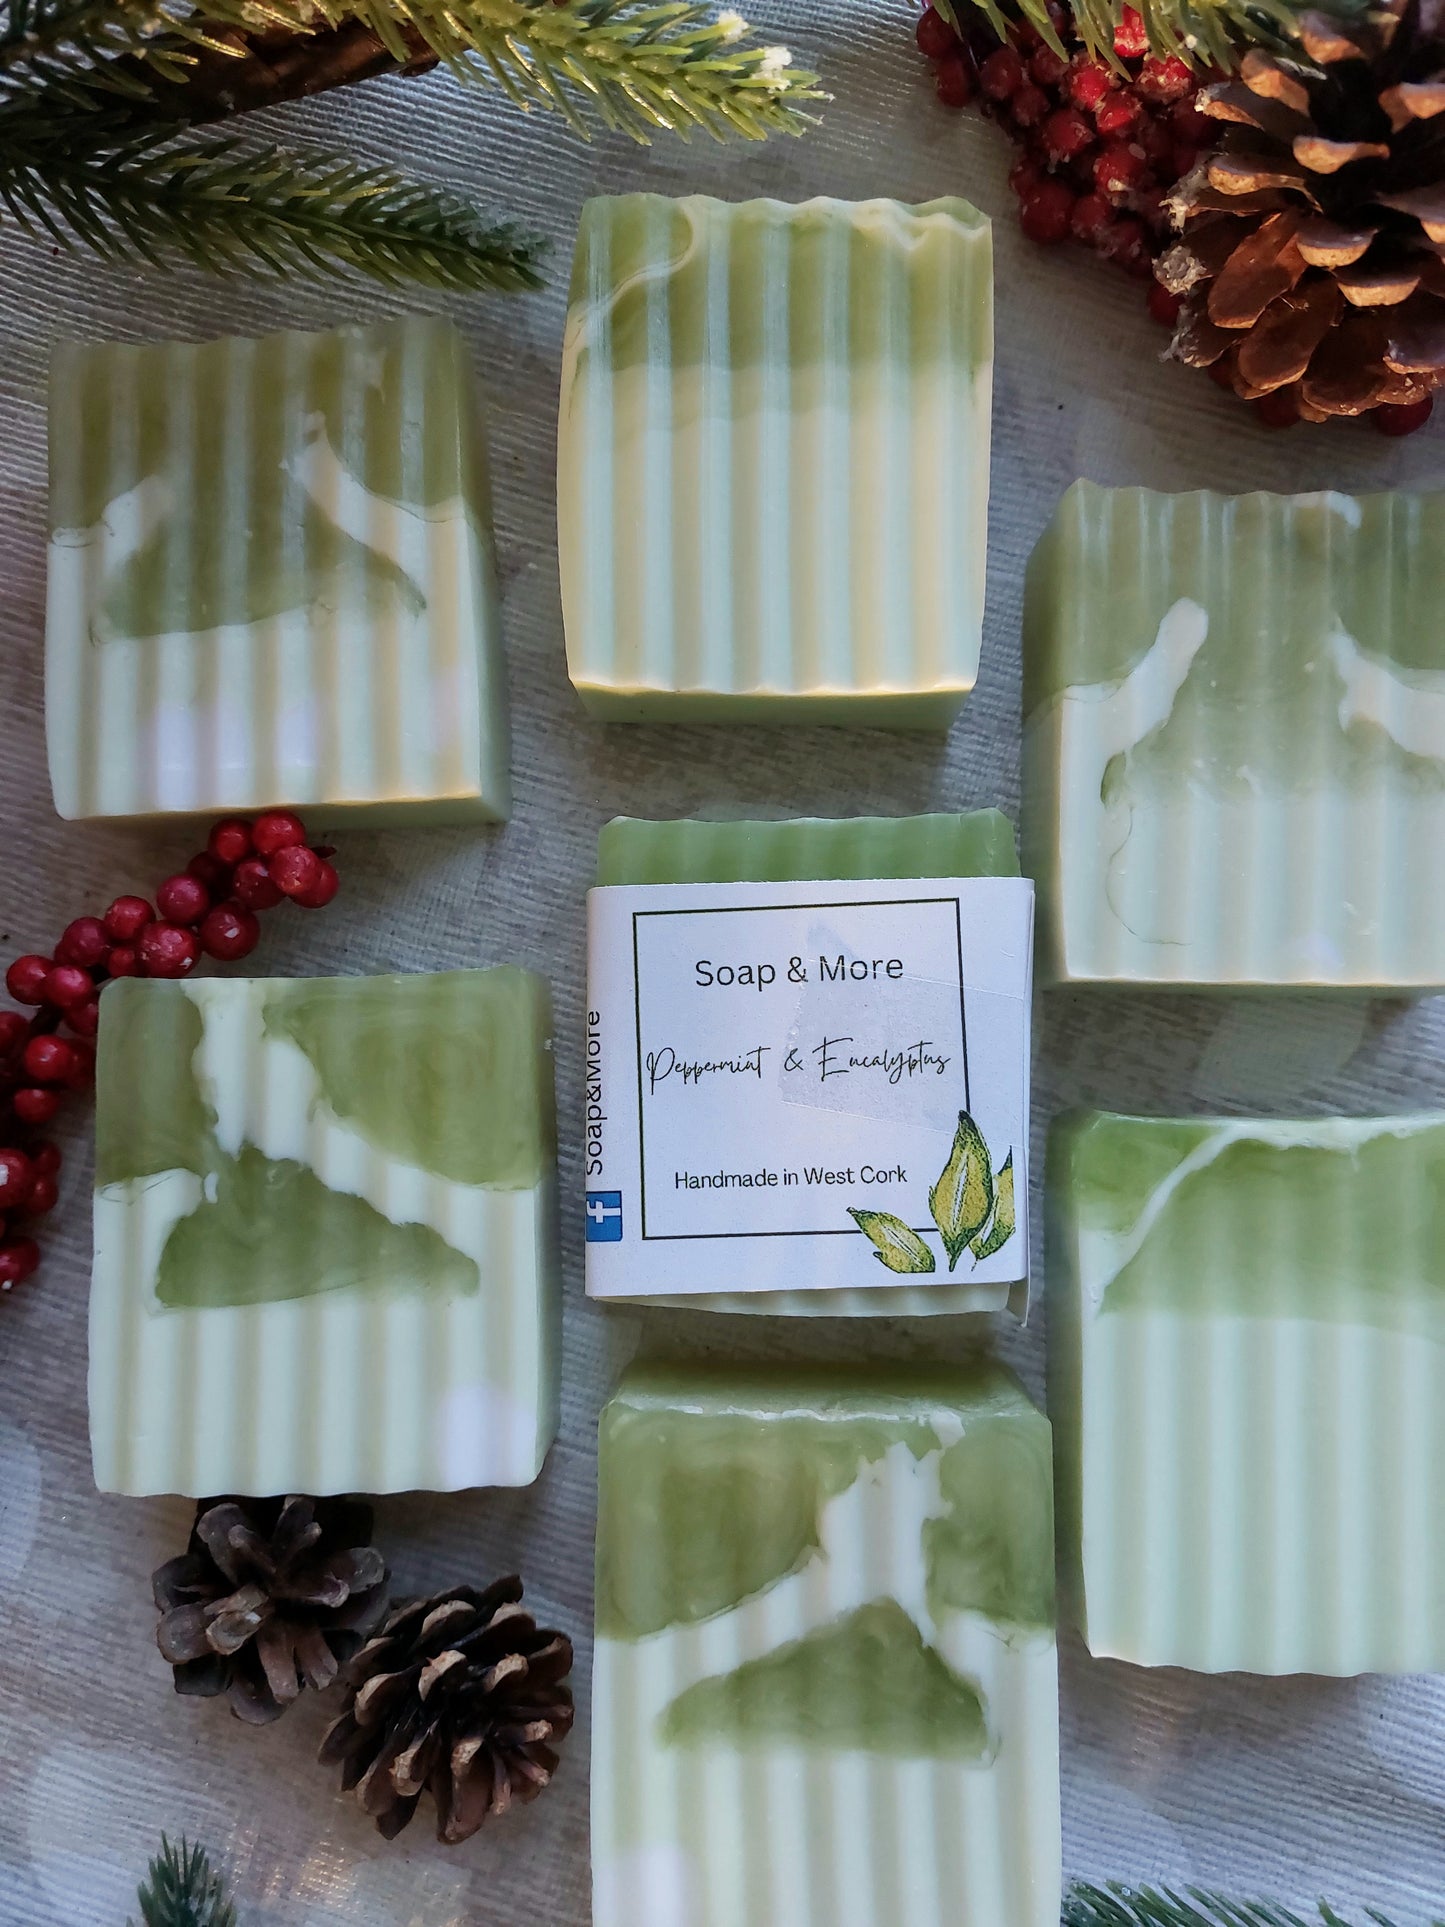 Aloe Vera Soap scented with Peppermint.